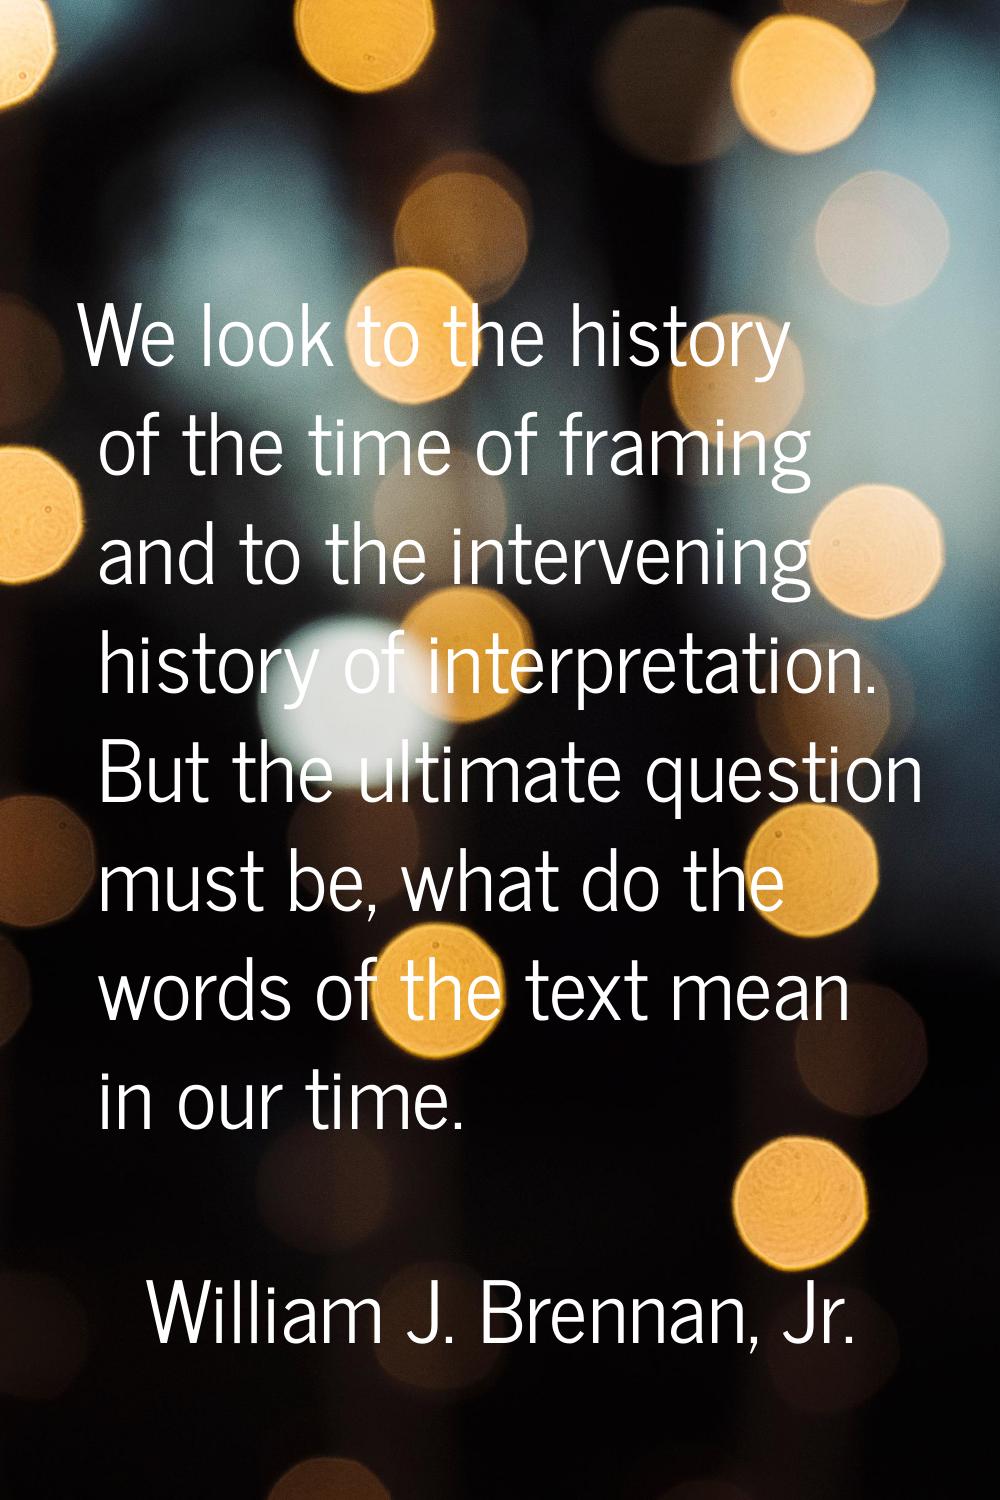 We look to the history of the time of framing and to the intervening history of interpretation. But